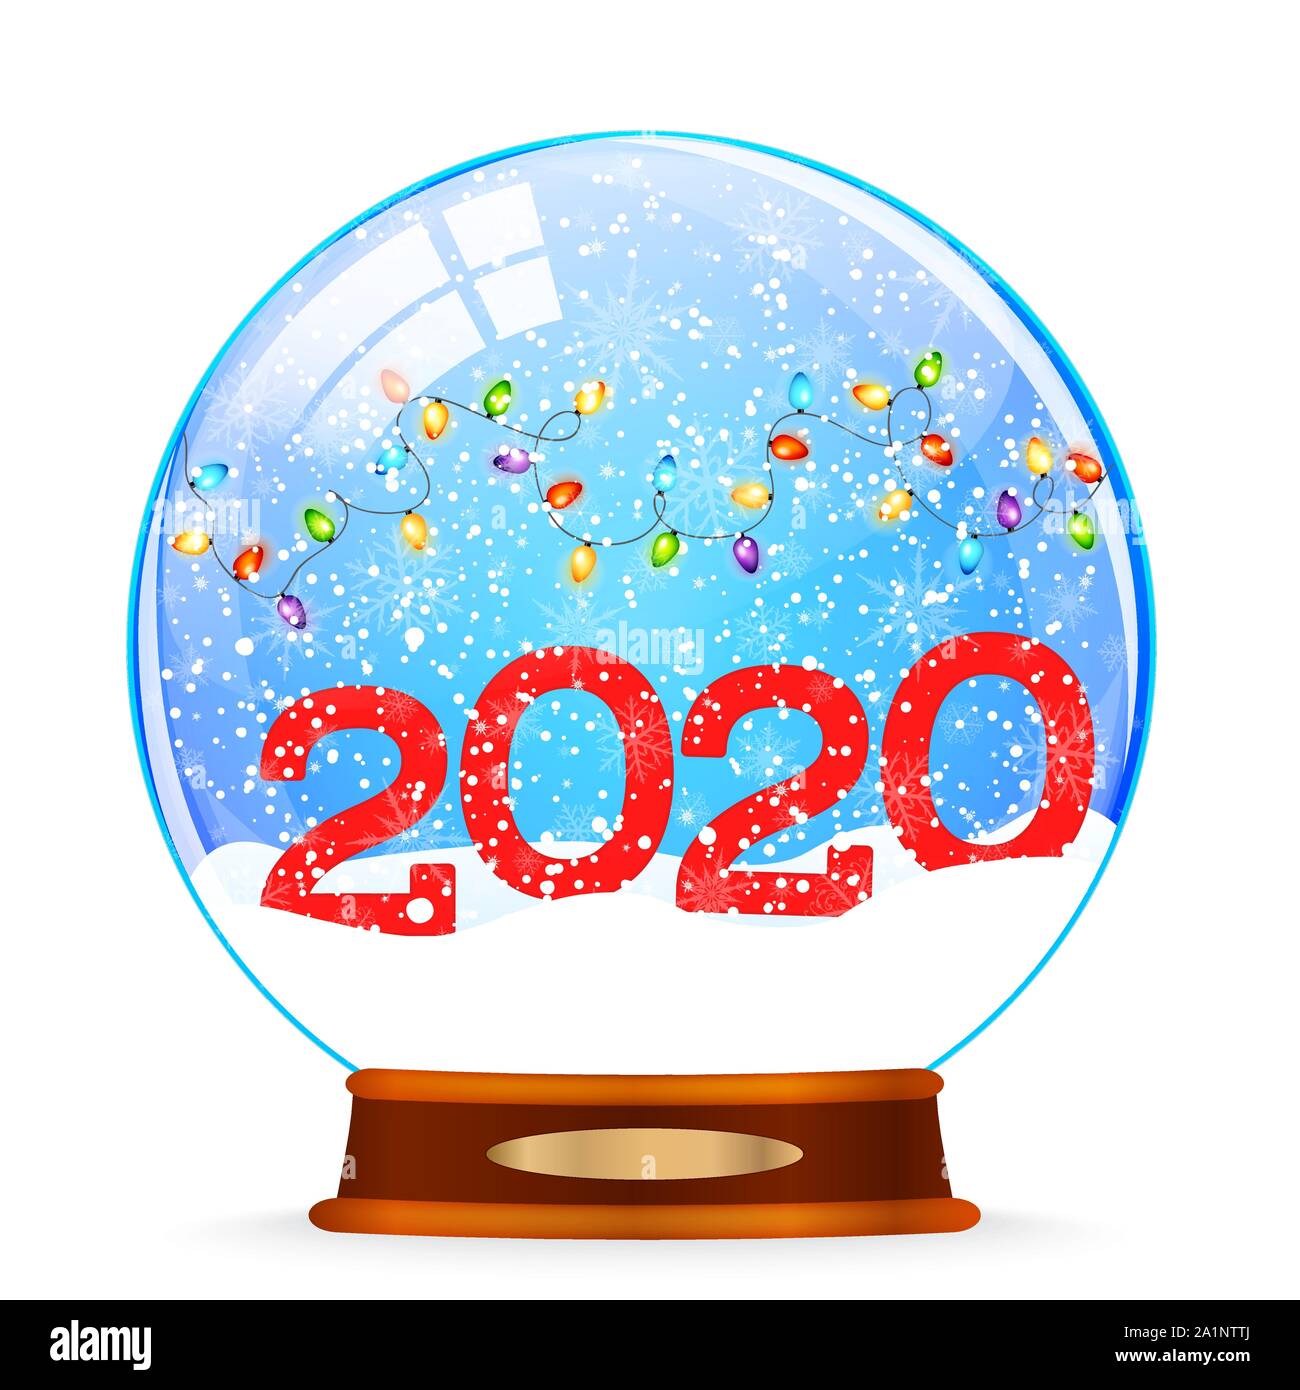 Merry Christmas and Happy New Year vector with snow globe Stock Vector